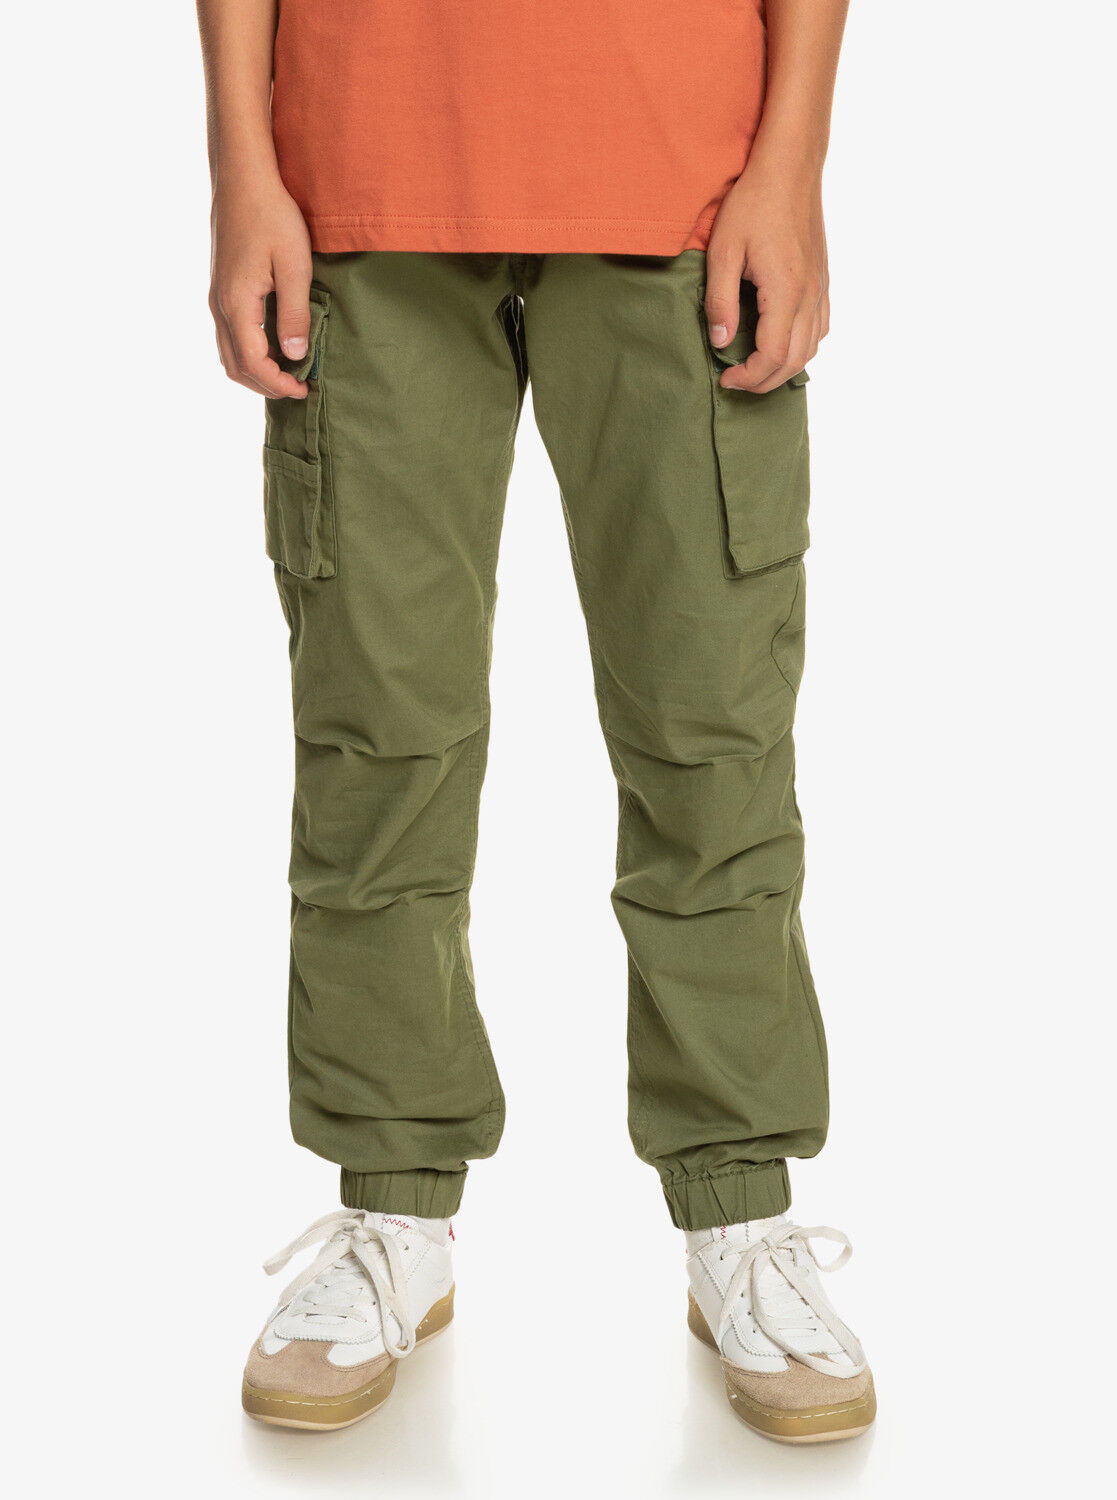 Quiksilver Upcargo To Surf Pant Youth - Tracksuit bottom - Kid's | Hardloop